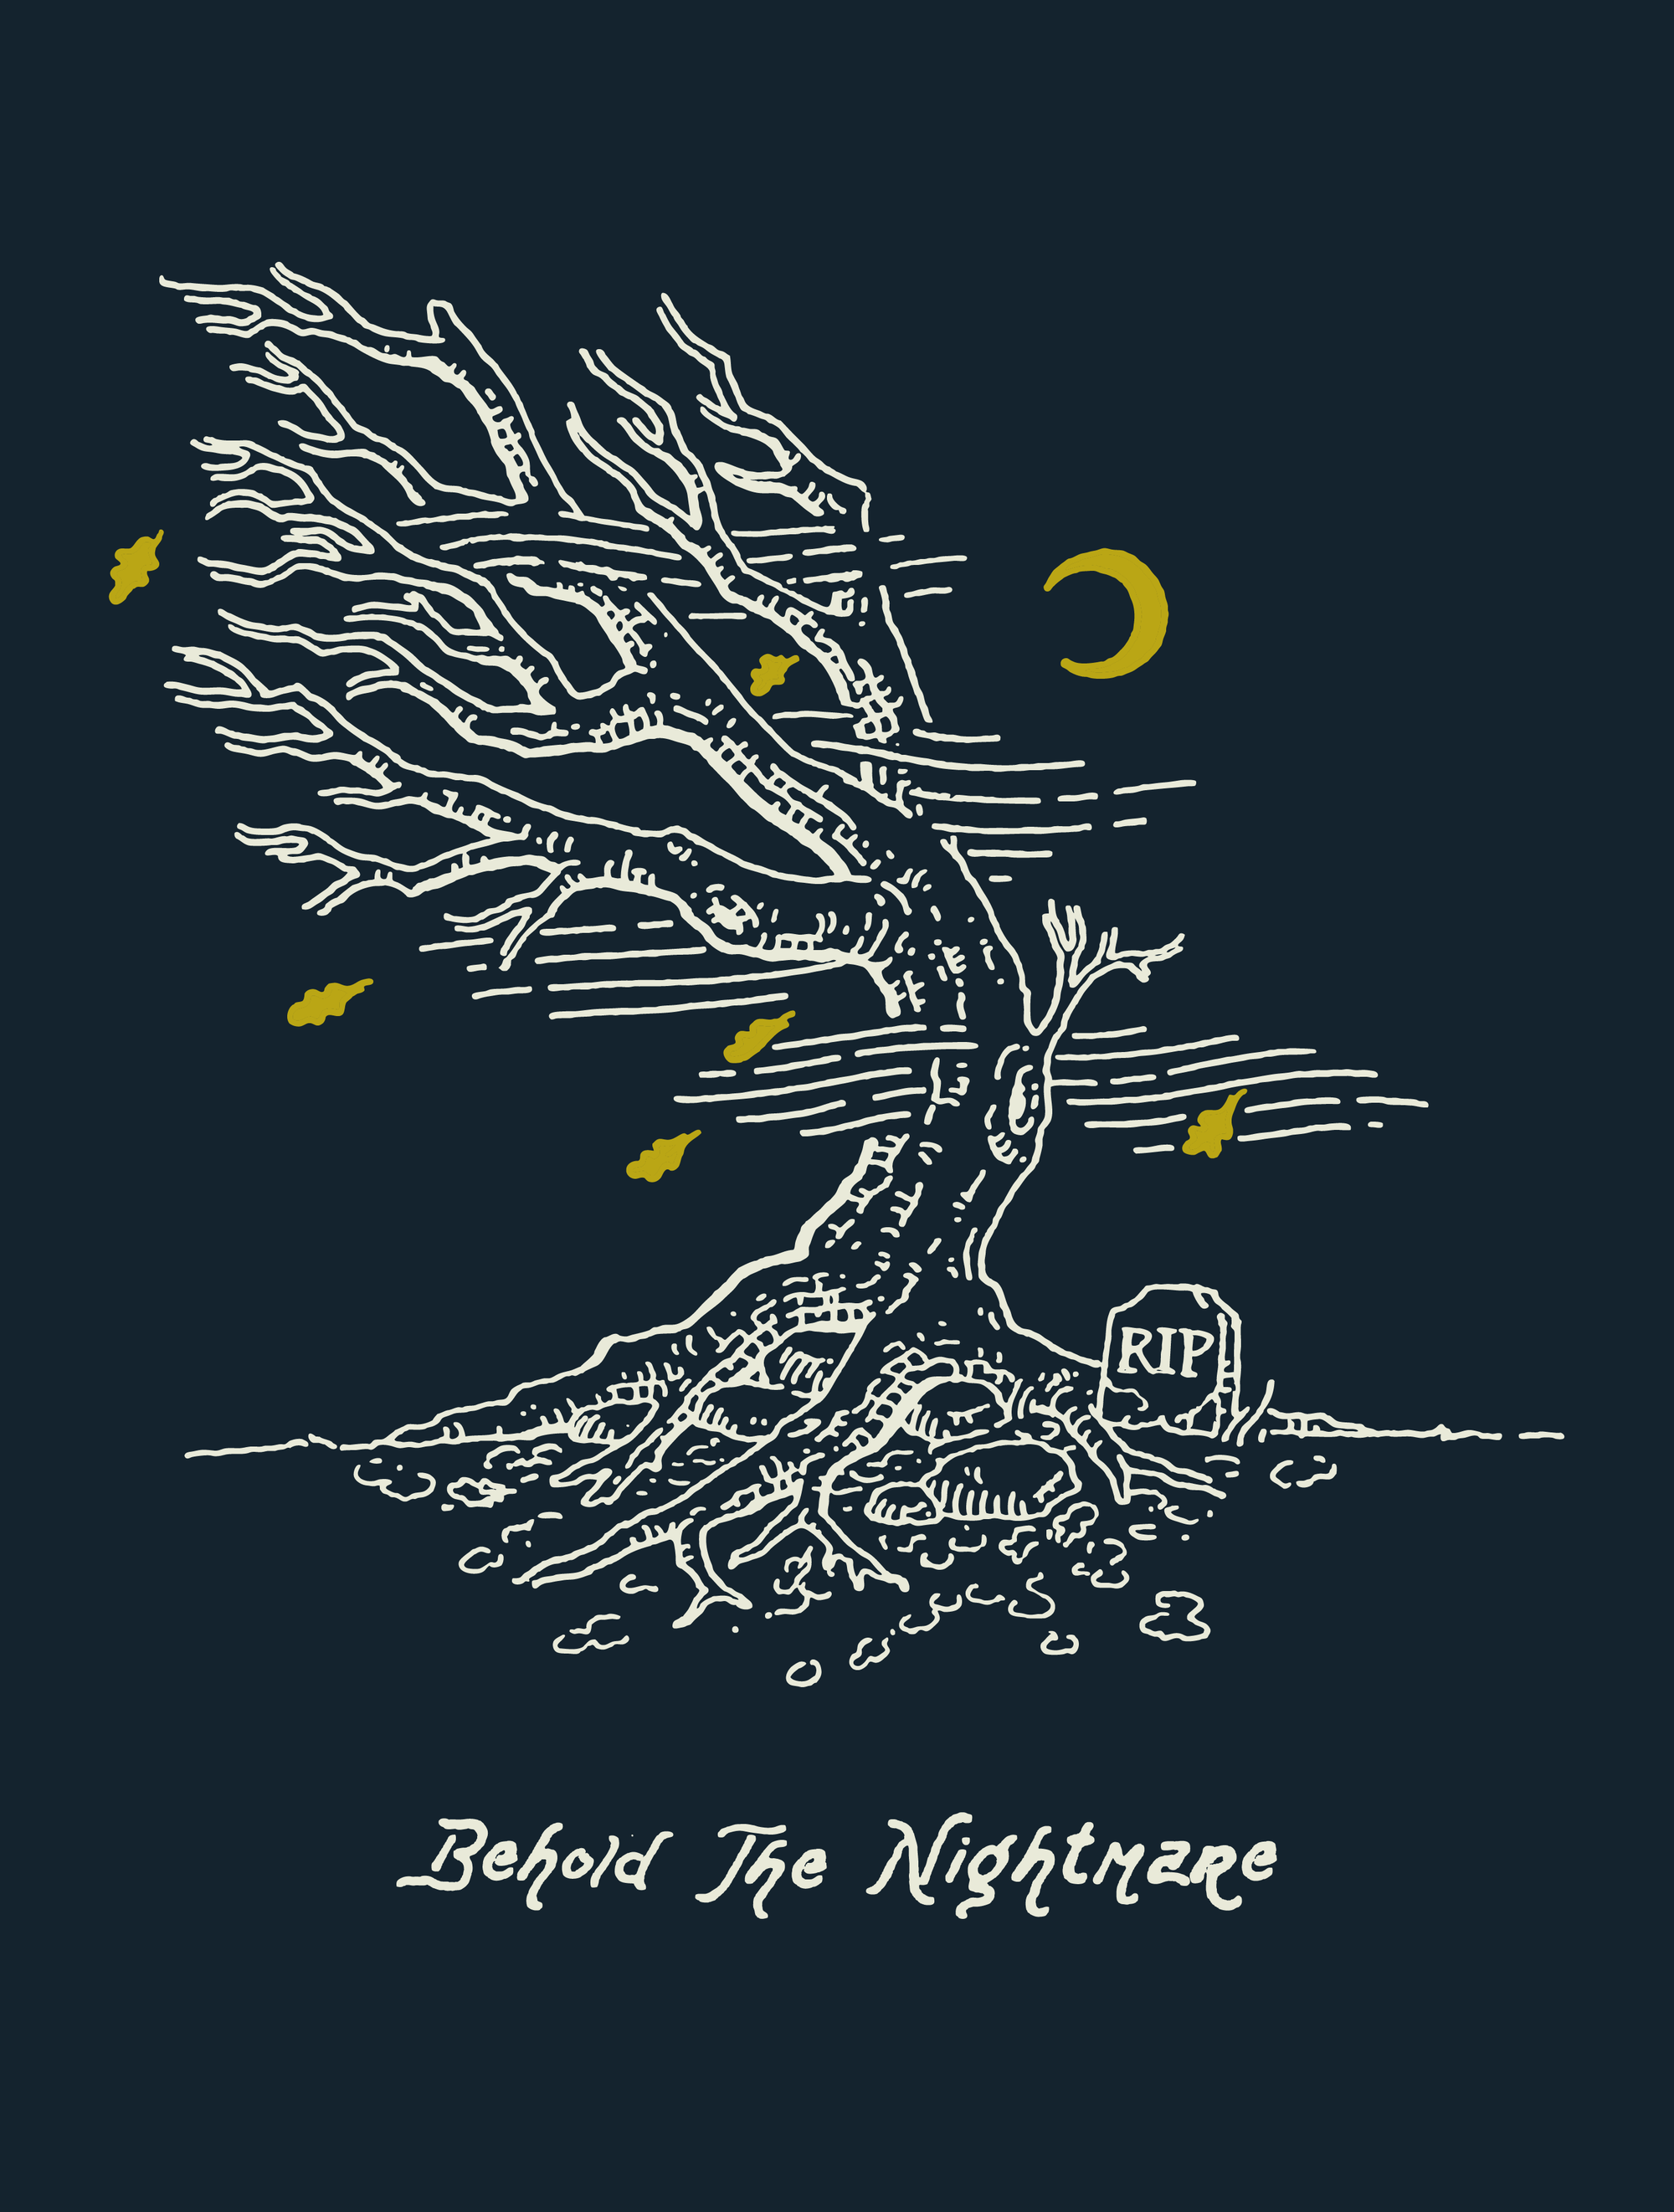 Image of wind blown tree bent with exposed roots, lines are present to indicate wind, a small gravestone is to the side and “Behold the Nightmare” is below in white ink. Yellow leaves and a yellow crescent moon are also present. On navy blue background